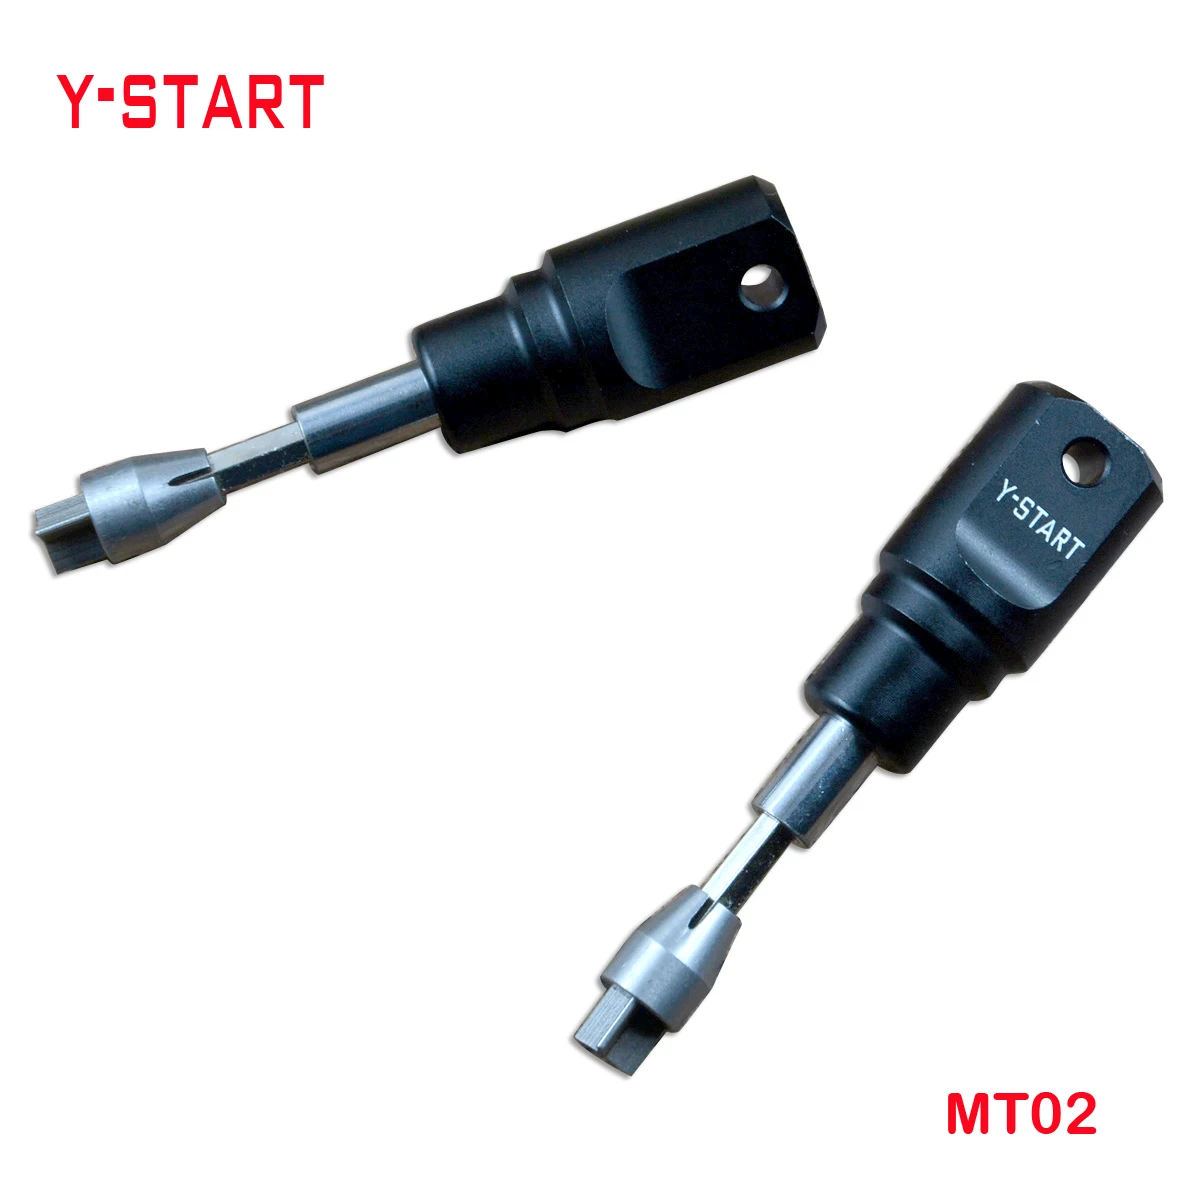 

Y-START MT02 Axial-screwdriver Aluminium Alloy Handle for Y-START Knives EDC Tool